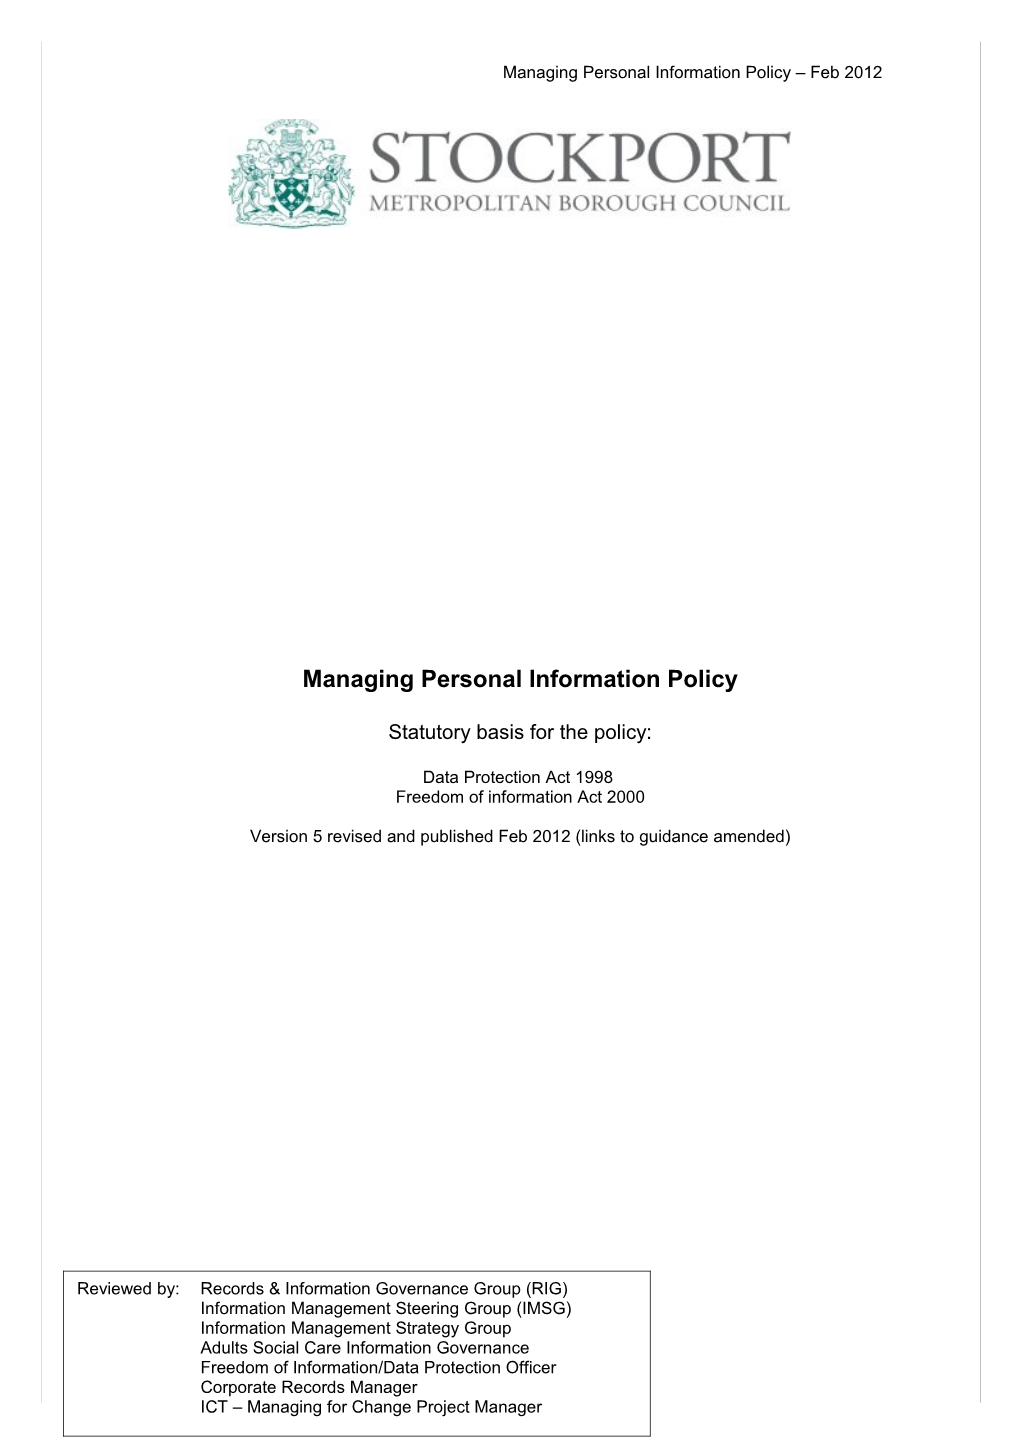 Managing Personal Information Policy Feb 2012